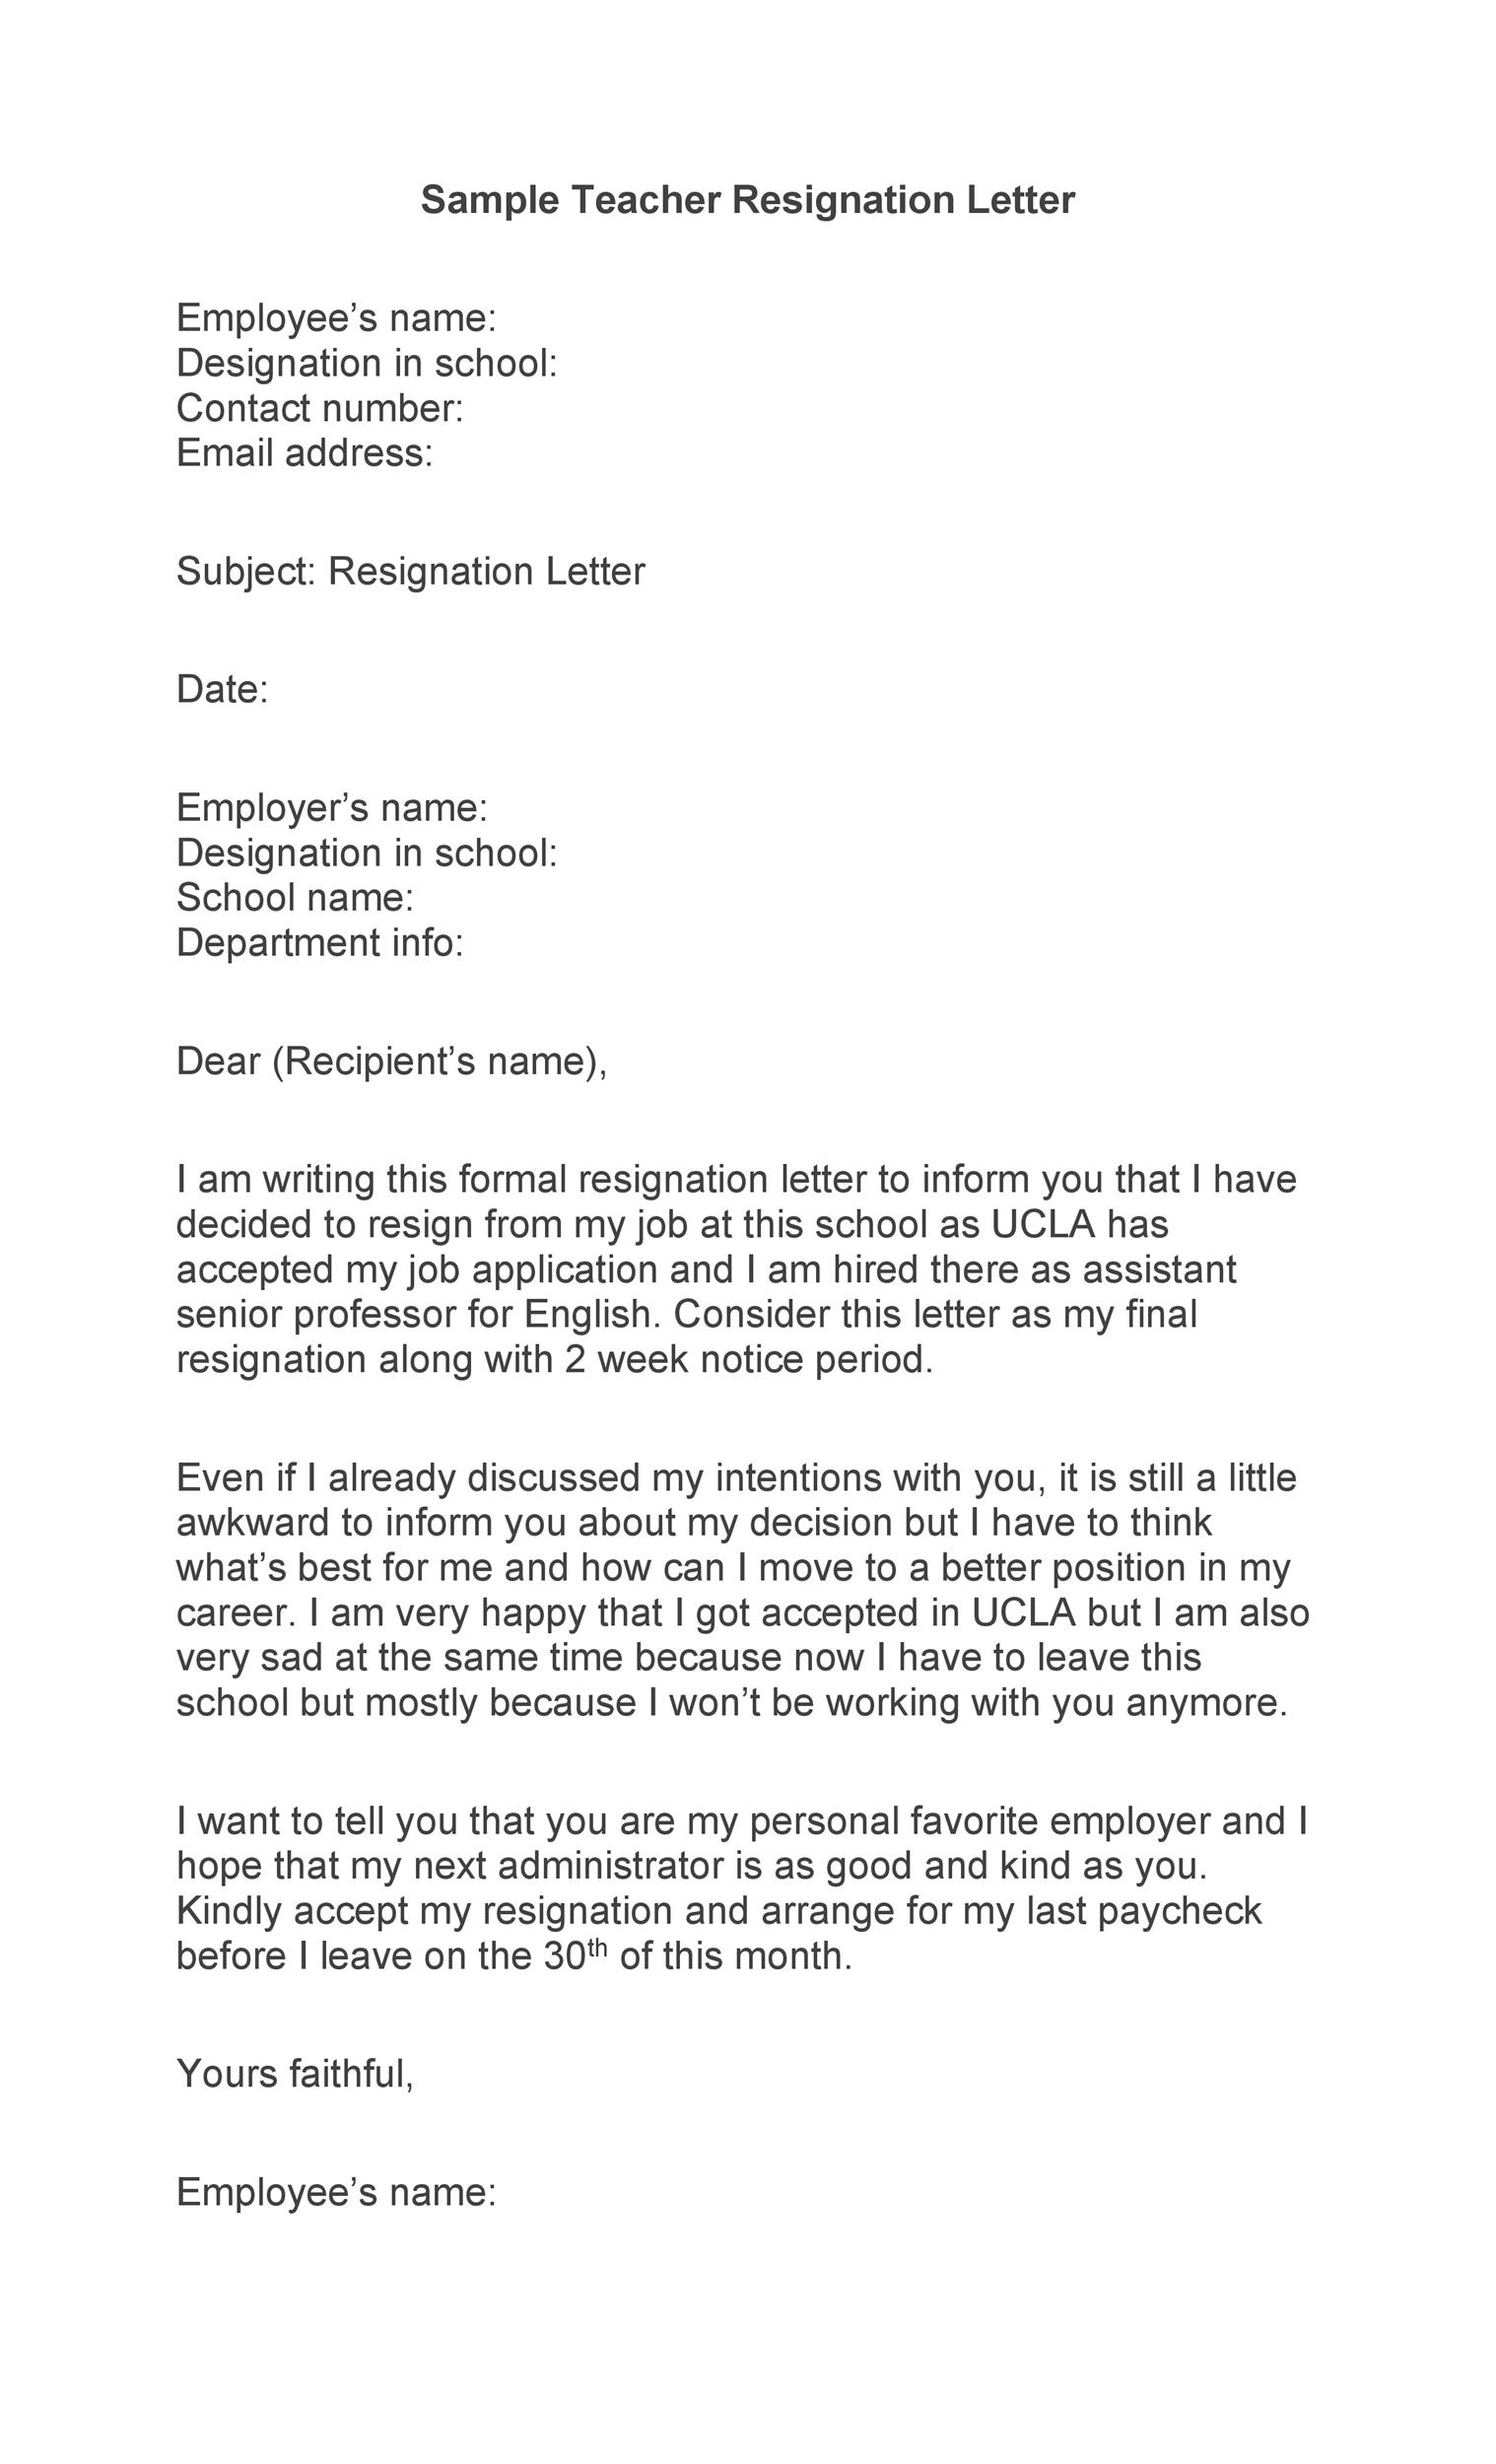 Sample Letter To Rejoin The Company from templatelab.com